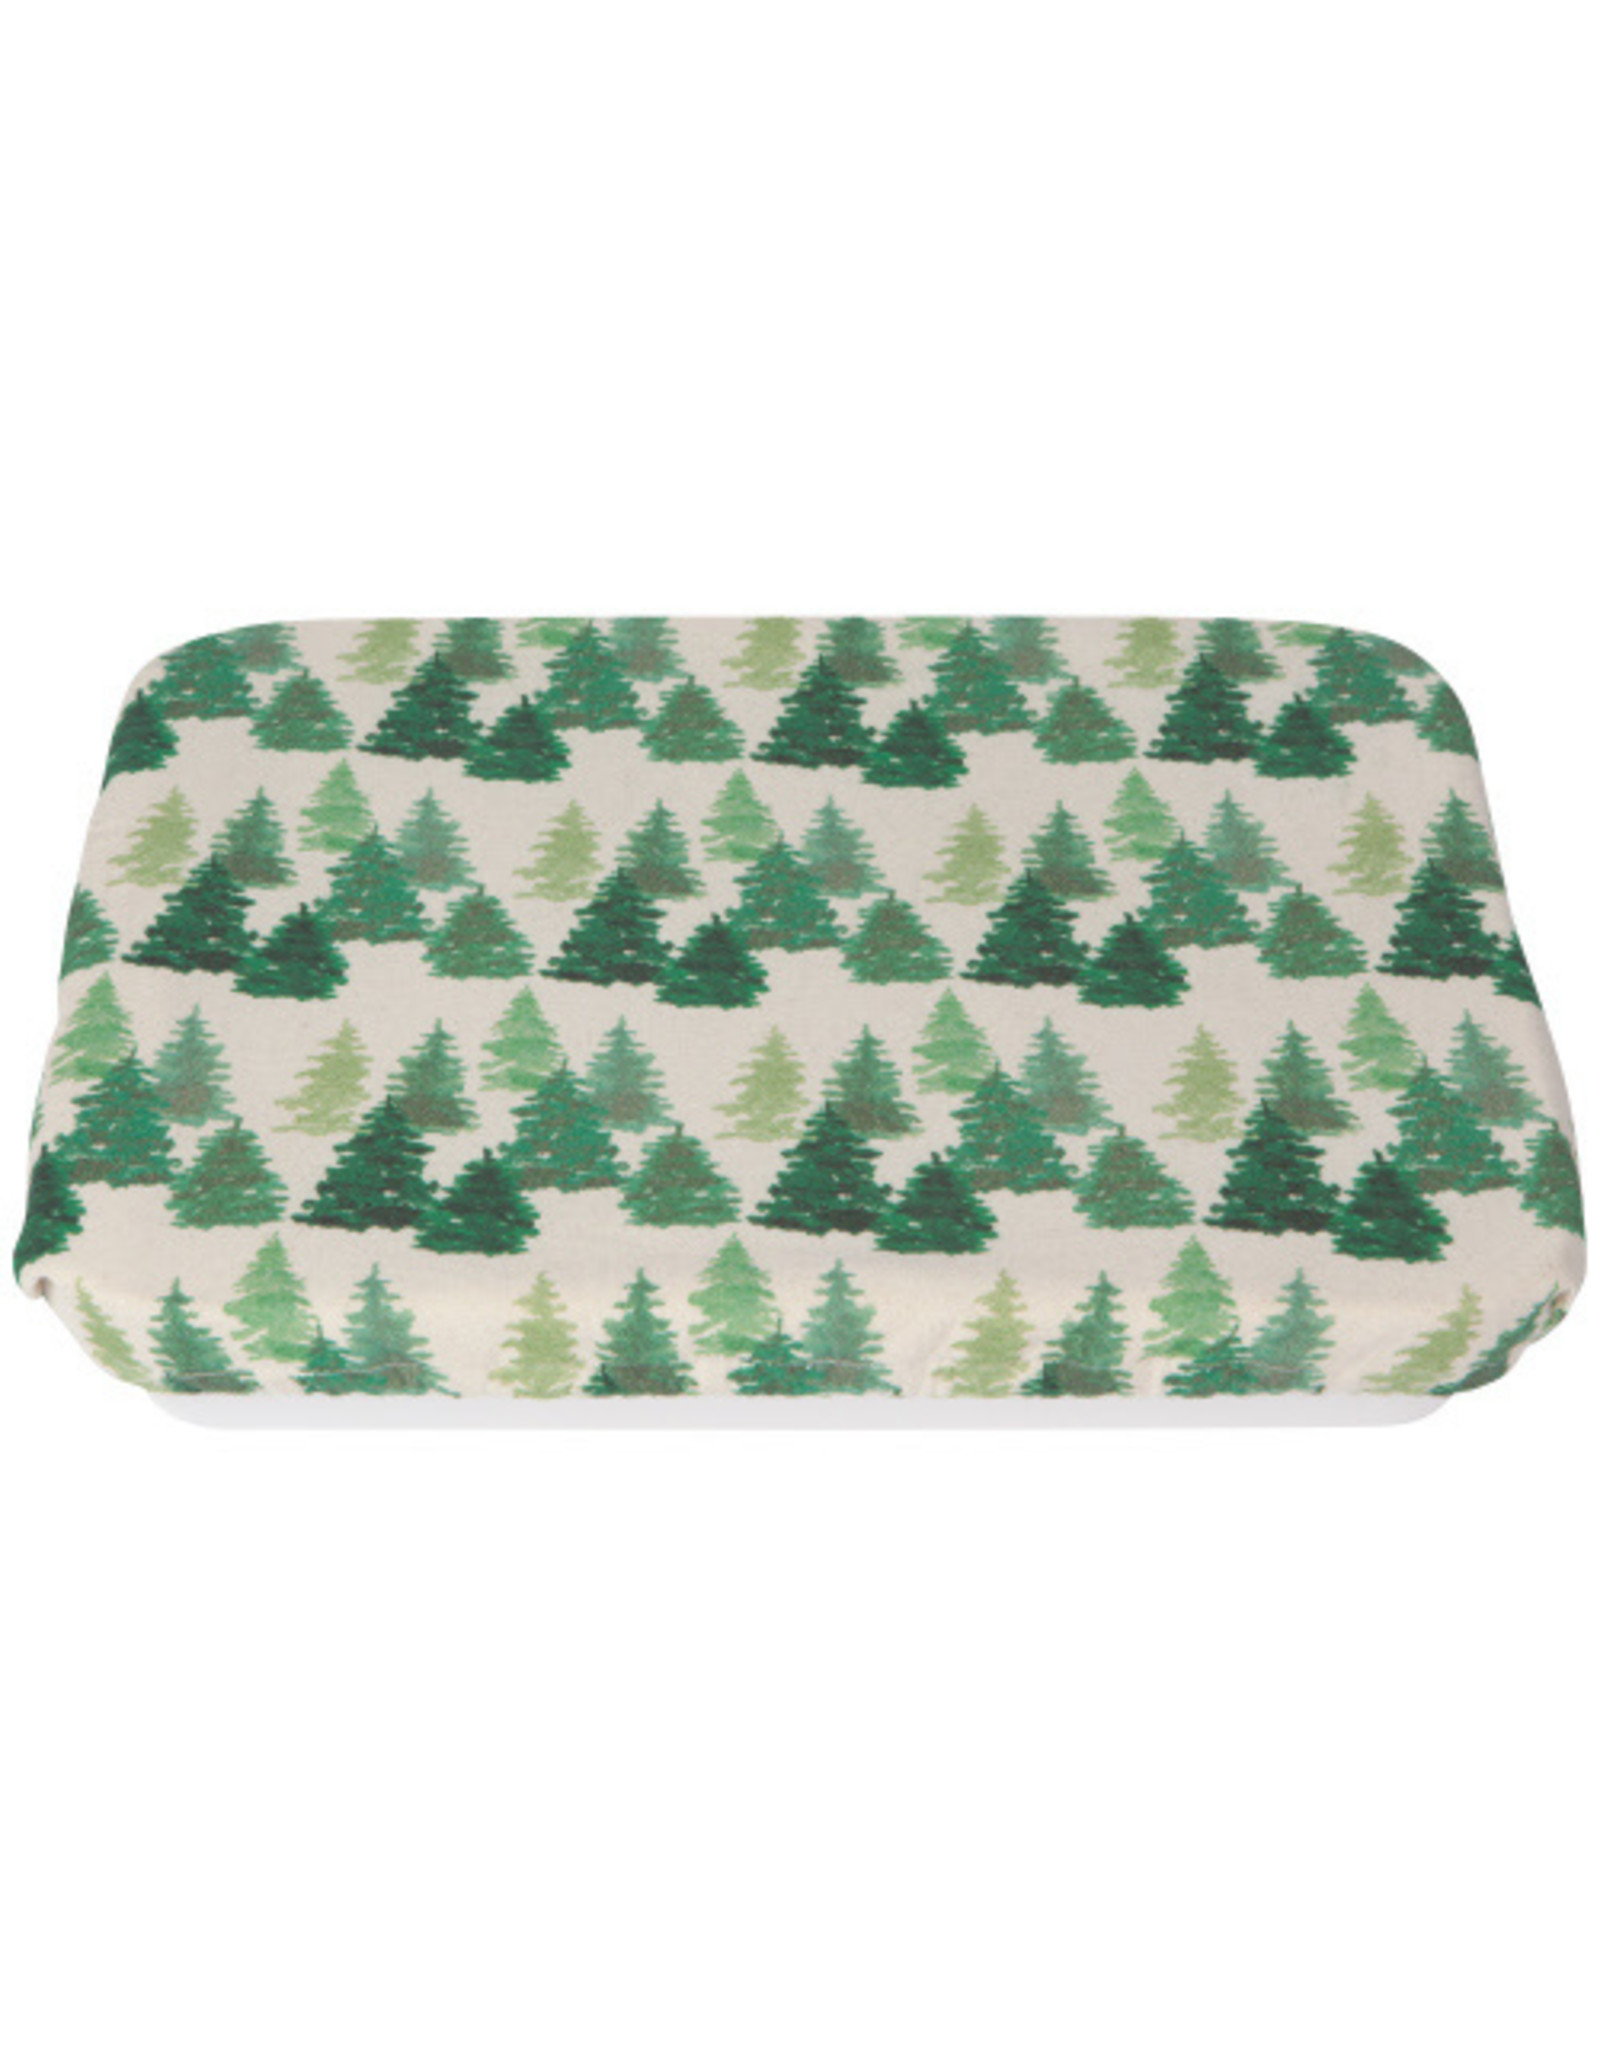 Baking Dish Cover Woods